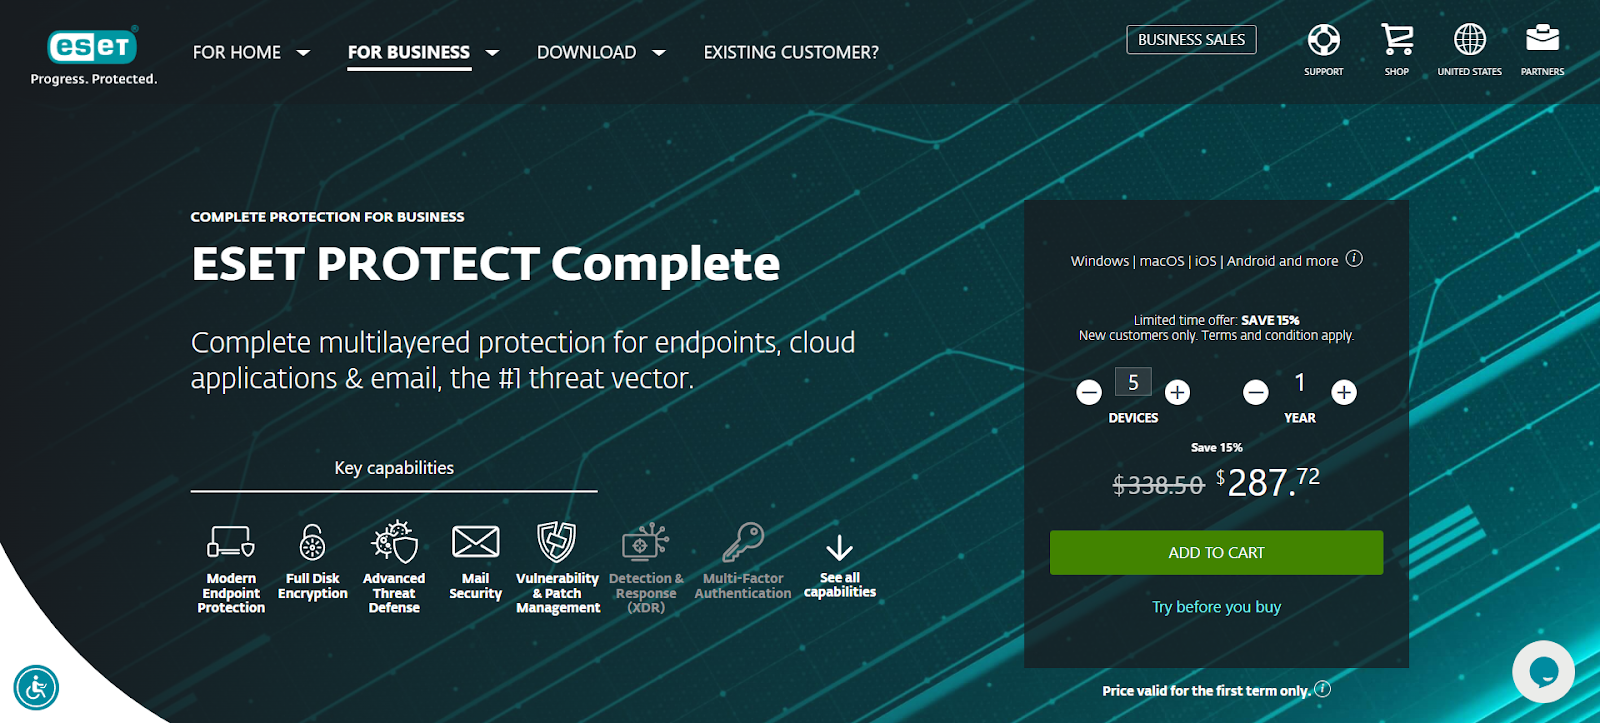 A screenshot of ESET PROTECT Complete's website